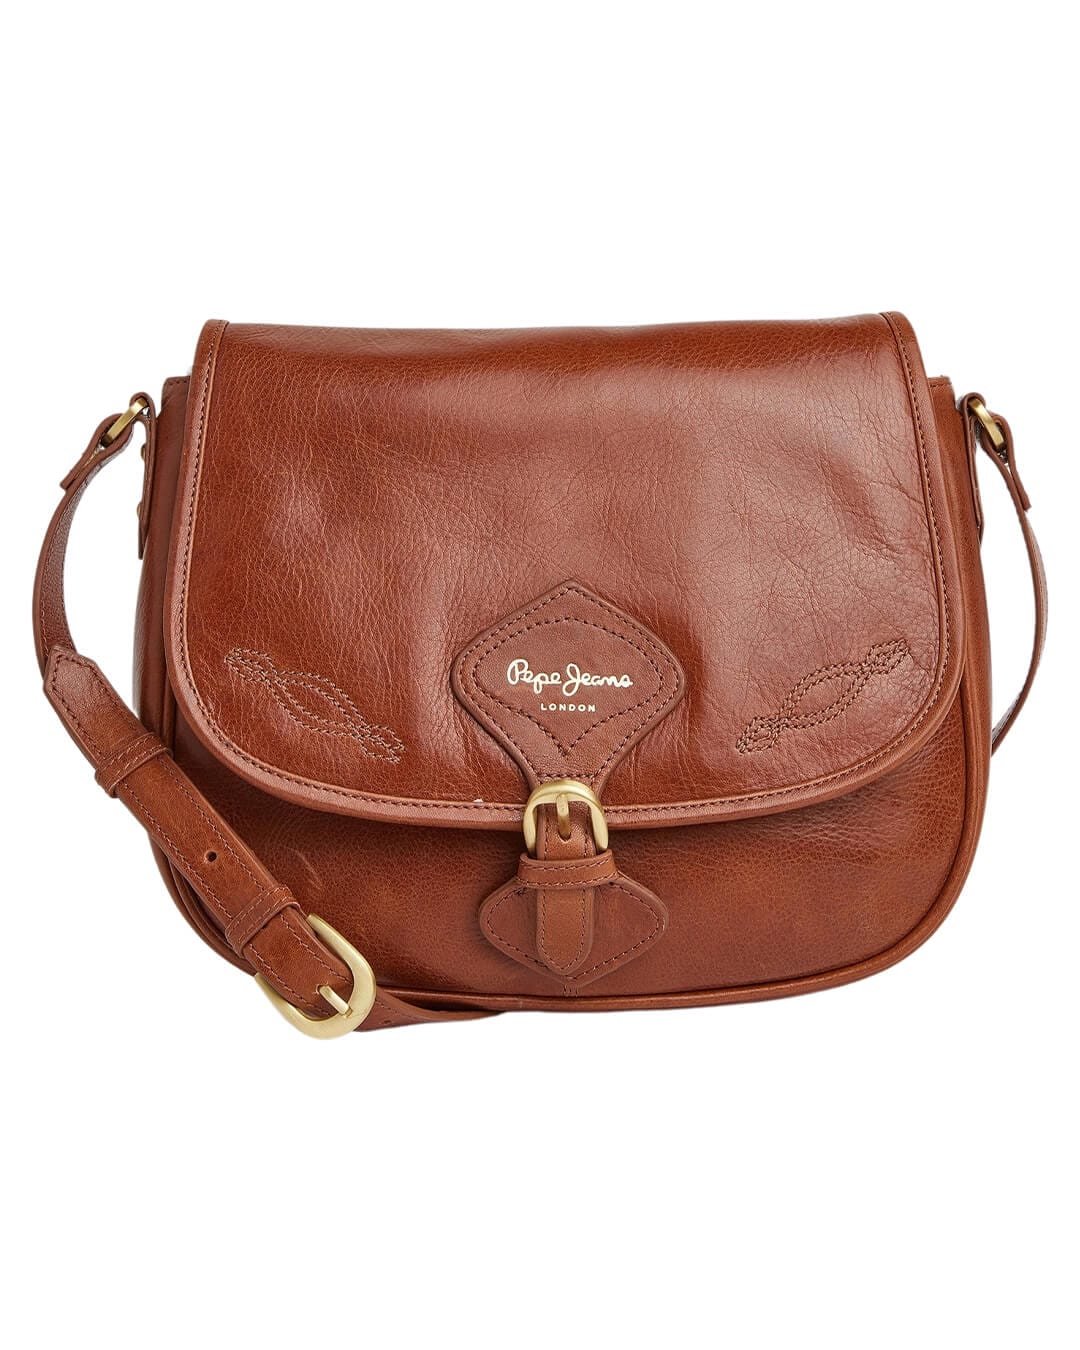 Pepe Jeans Bags ONE Pepe Jeans Andrea Brown Bag